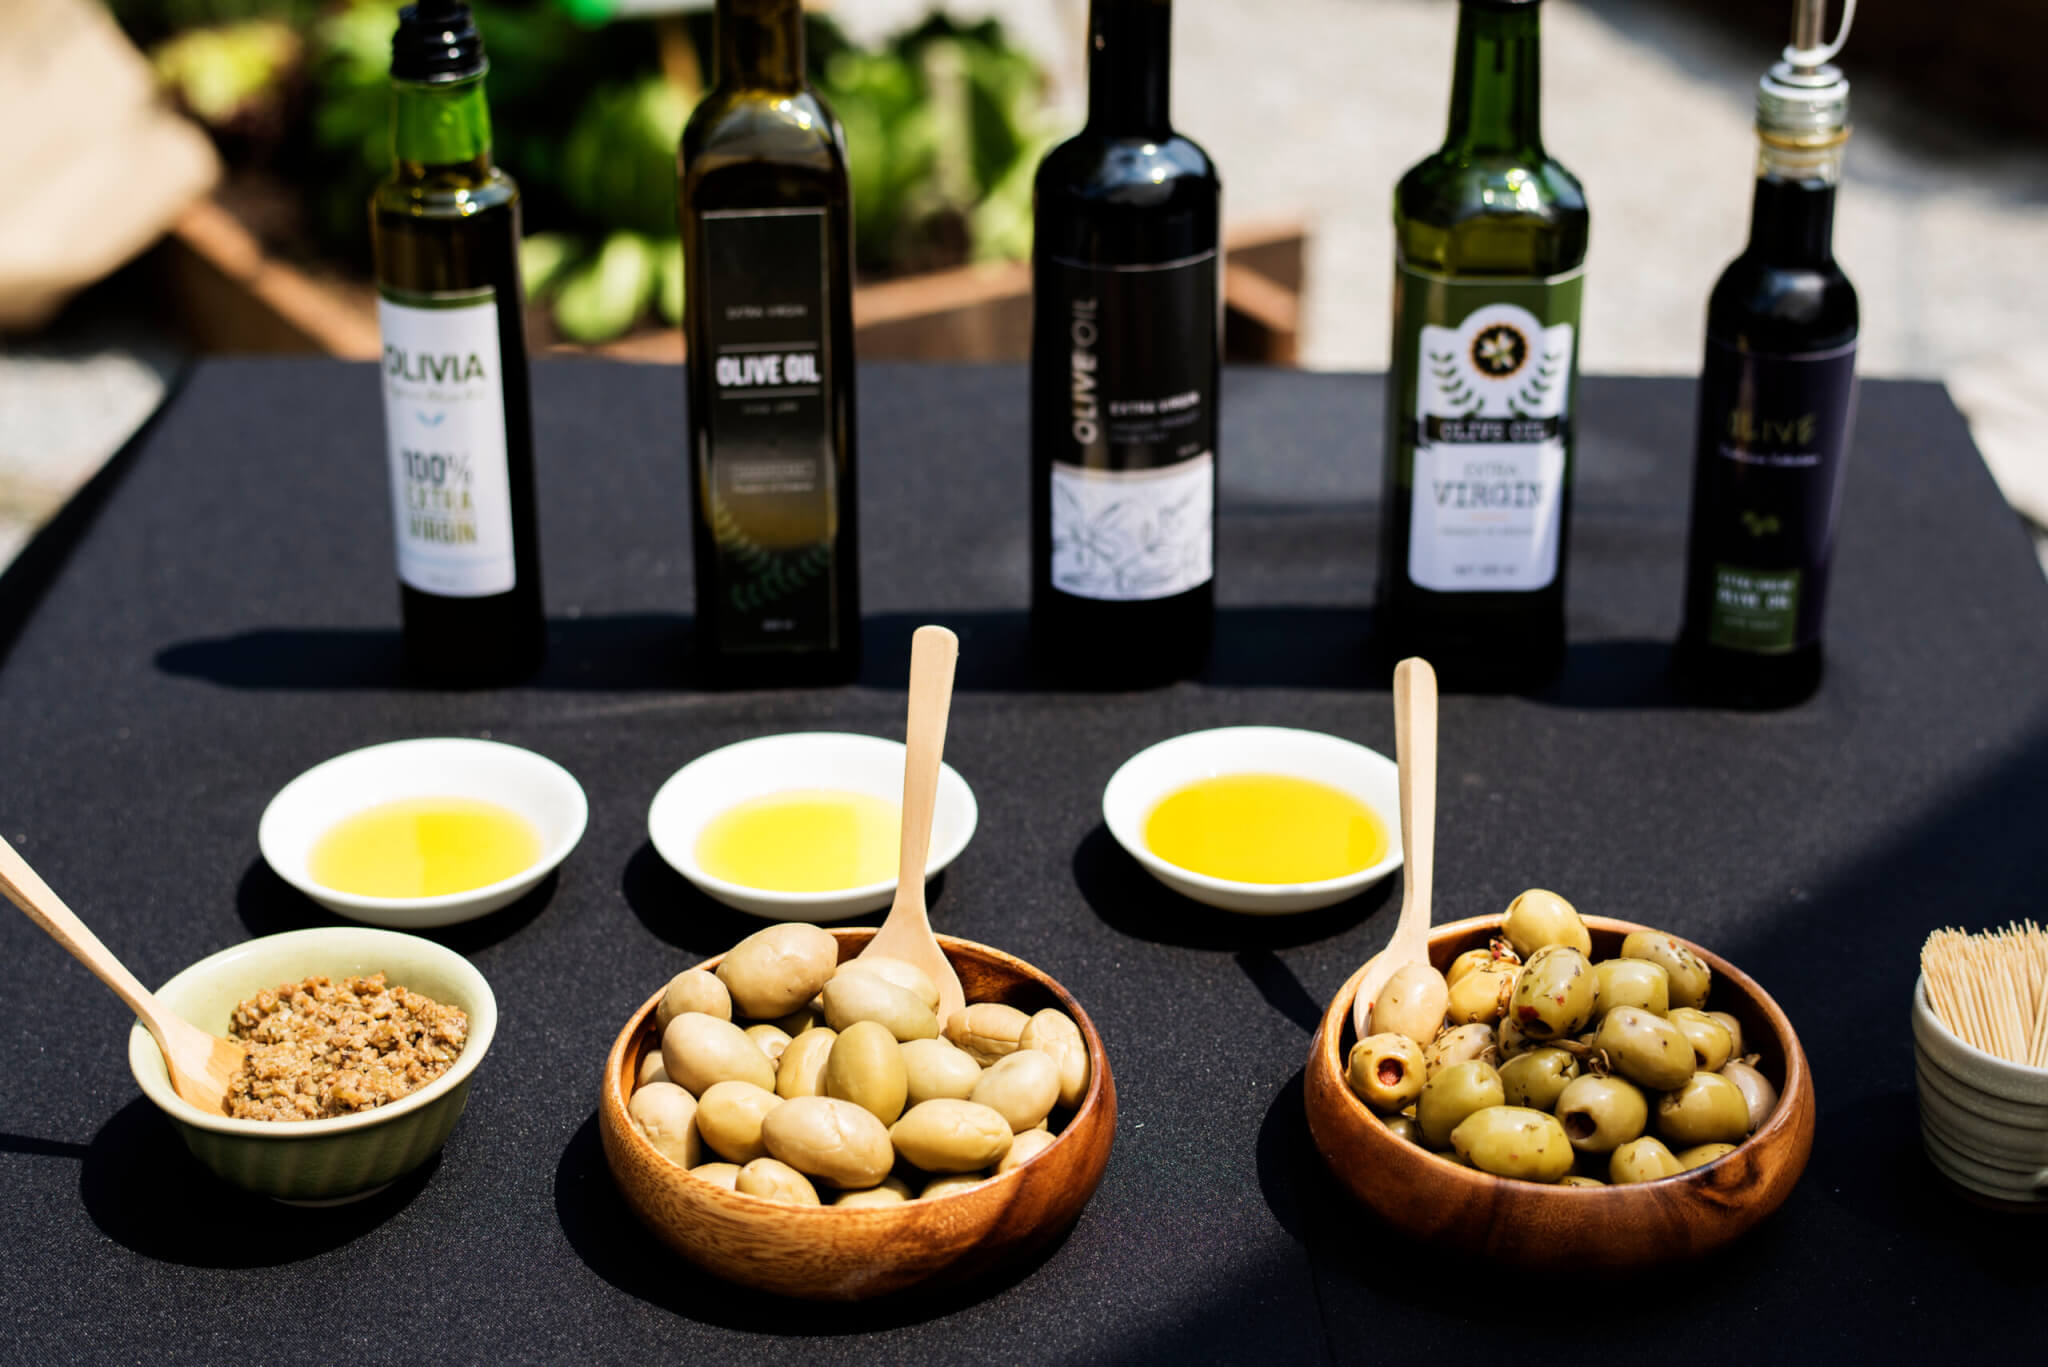 Olive oil choosing choice on the table